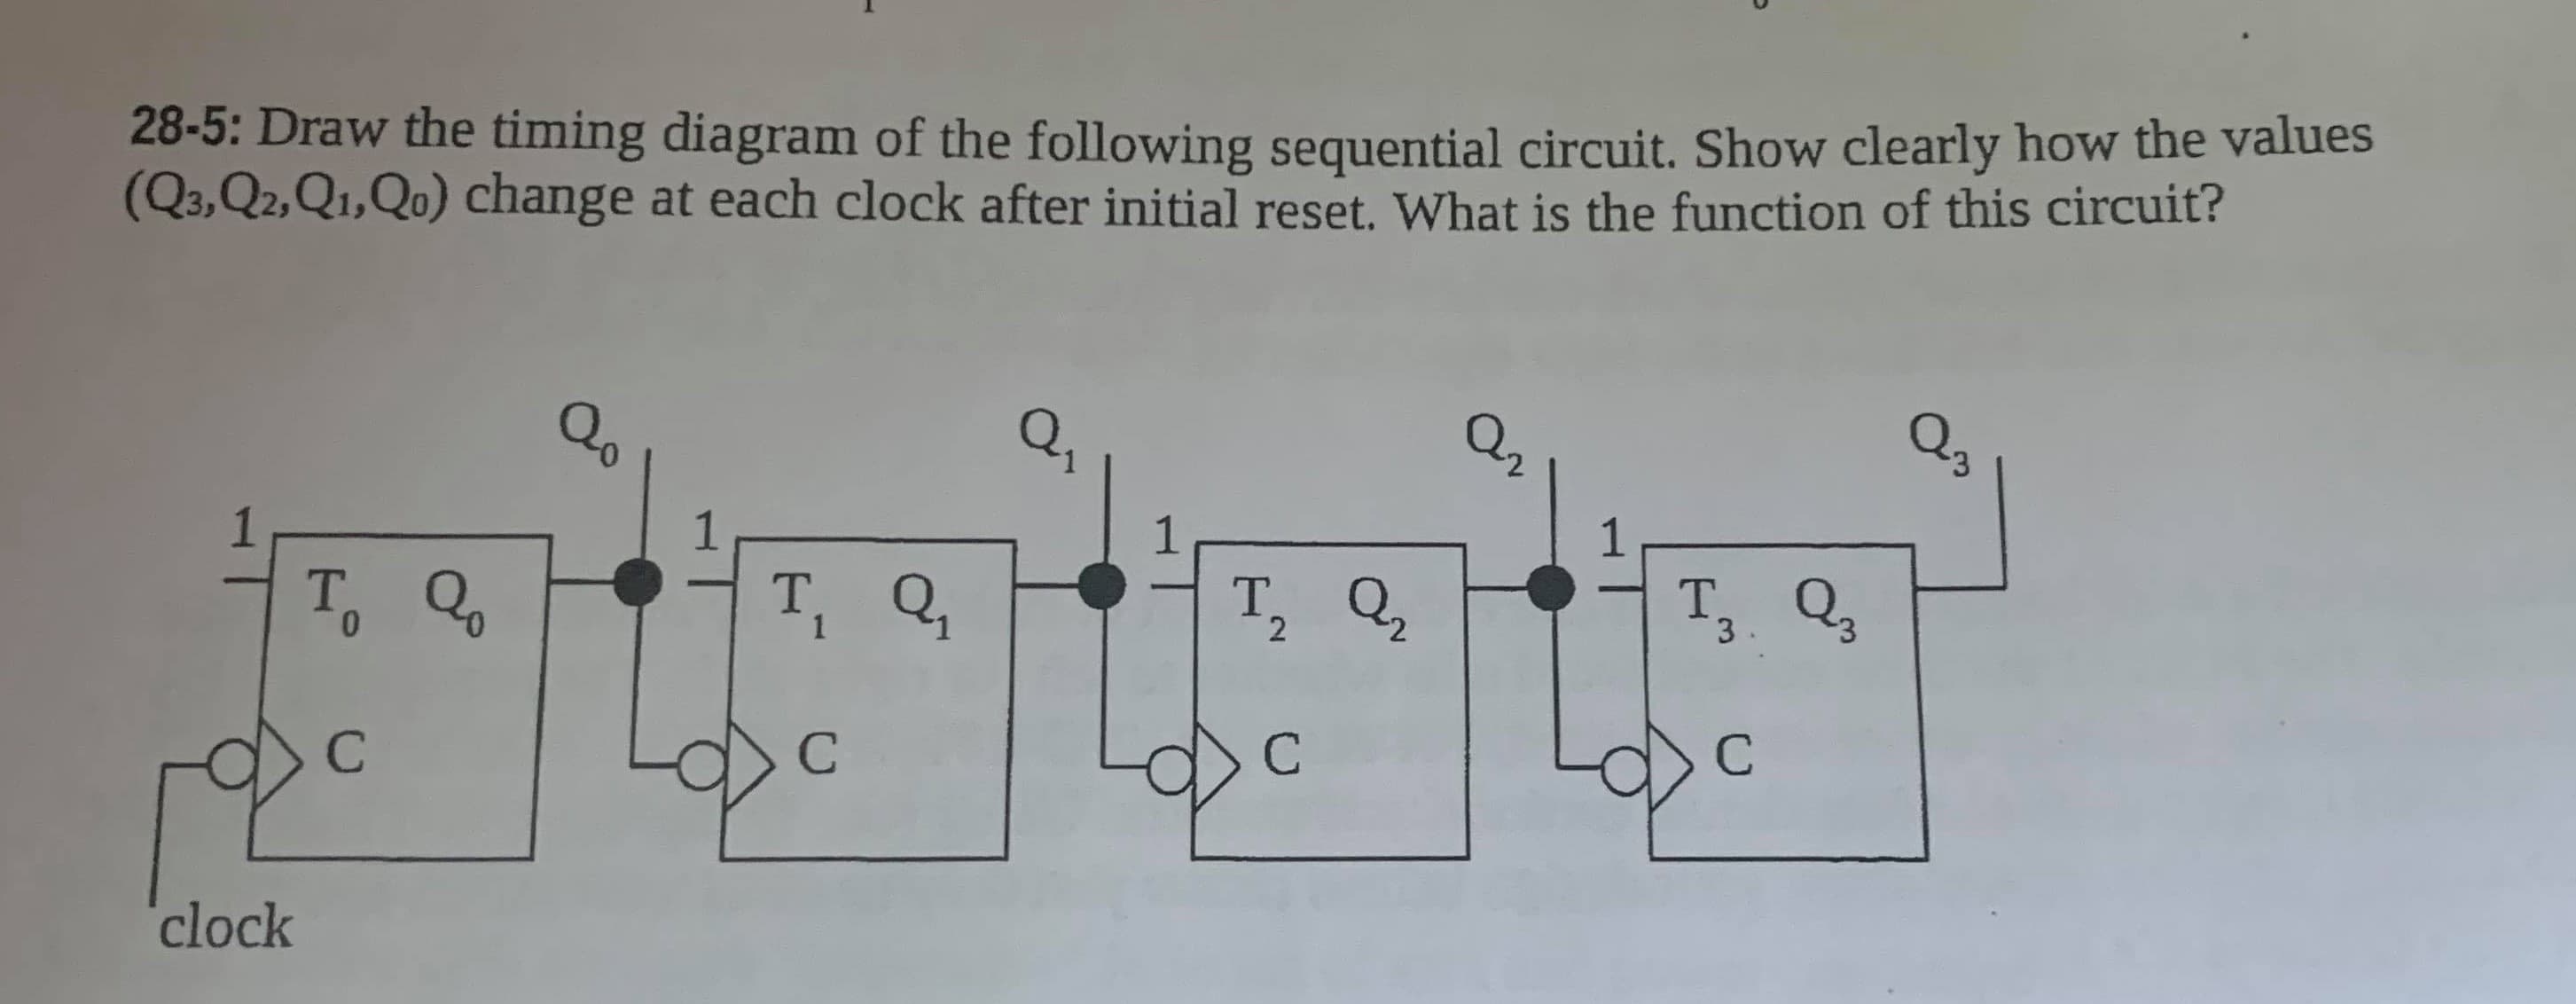 28-5: Draw the timing diagram of the following sequential circuit. Show clearly how the values
(Q3,Q2, Q1,Qo) change at each clock after initial reset. What is the function of this circuit?
Q,
Q2
Q3
T.
0.
т, Q,
т, Q,
T.
3.
т, Q,
T.
clock
